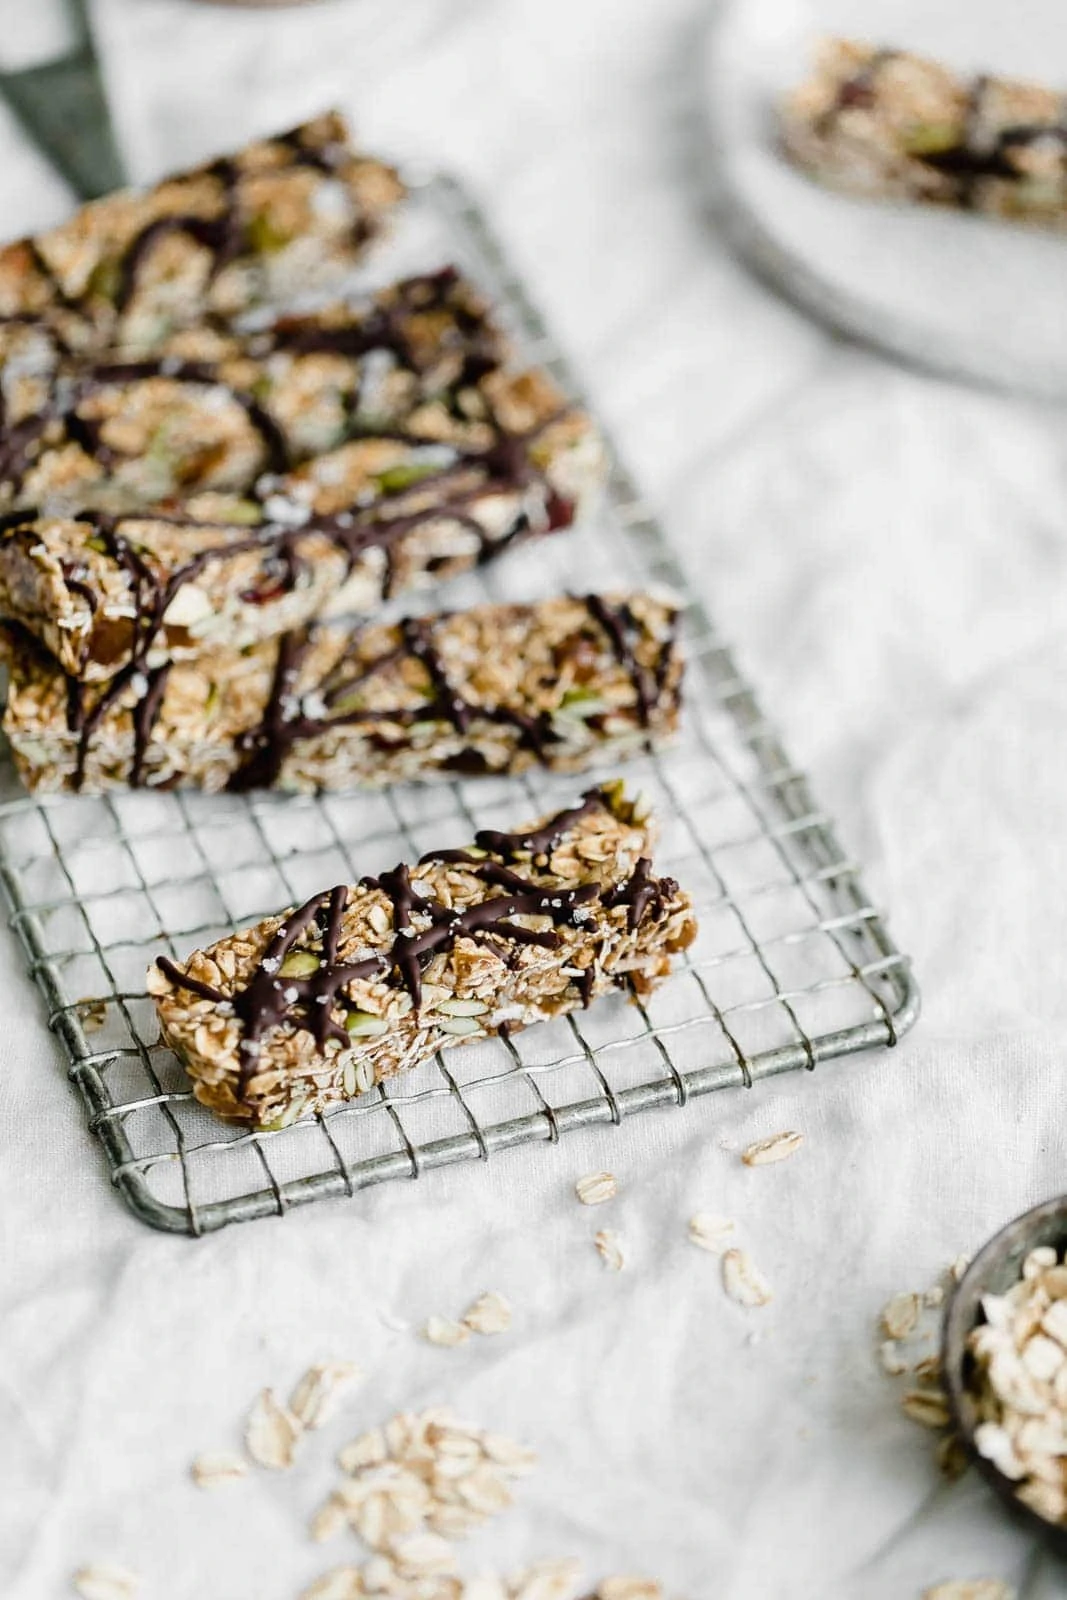 Raw Seedy Granola Bars made with oats, sunflower seeds, pepitas, sesame seeds, almonds, apricots, and honey, topped with a drizzle of dark chocolate